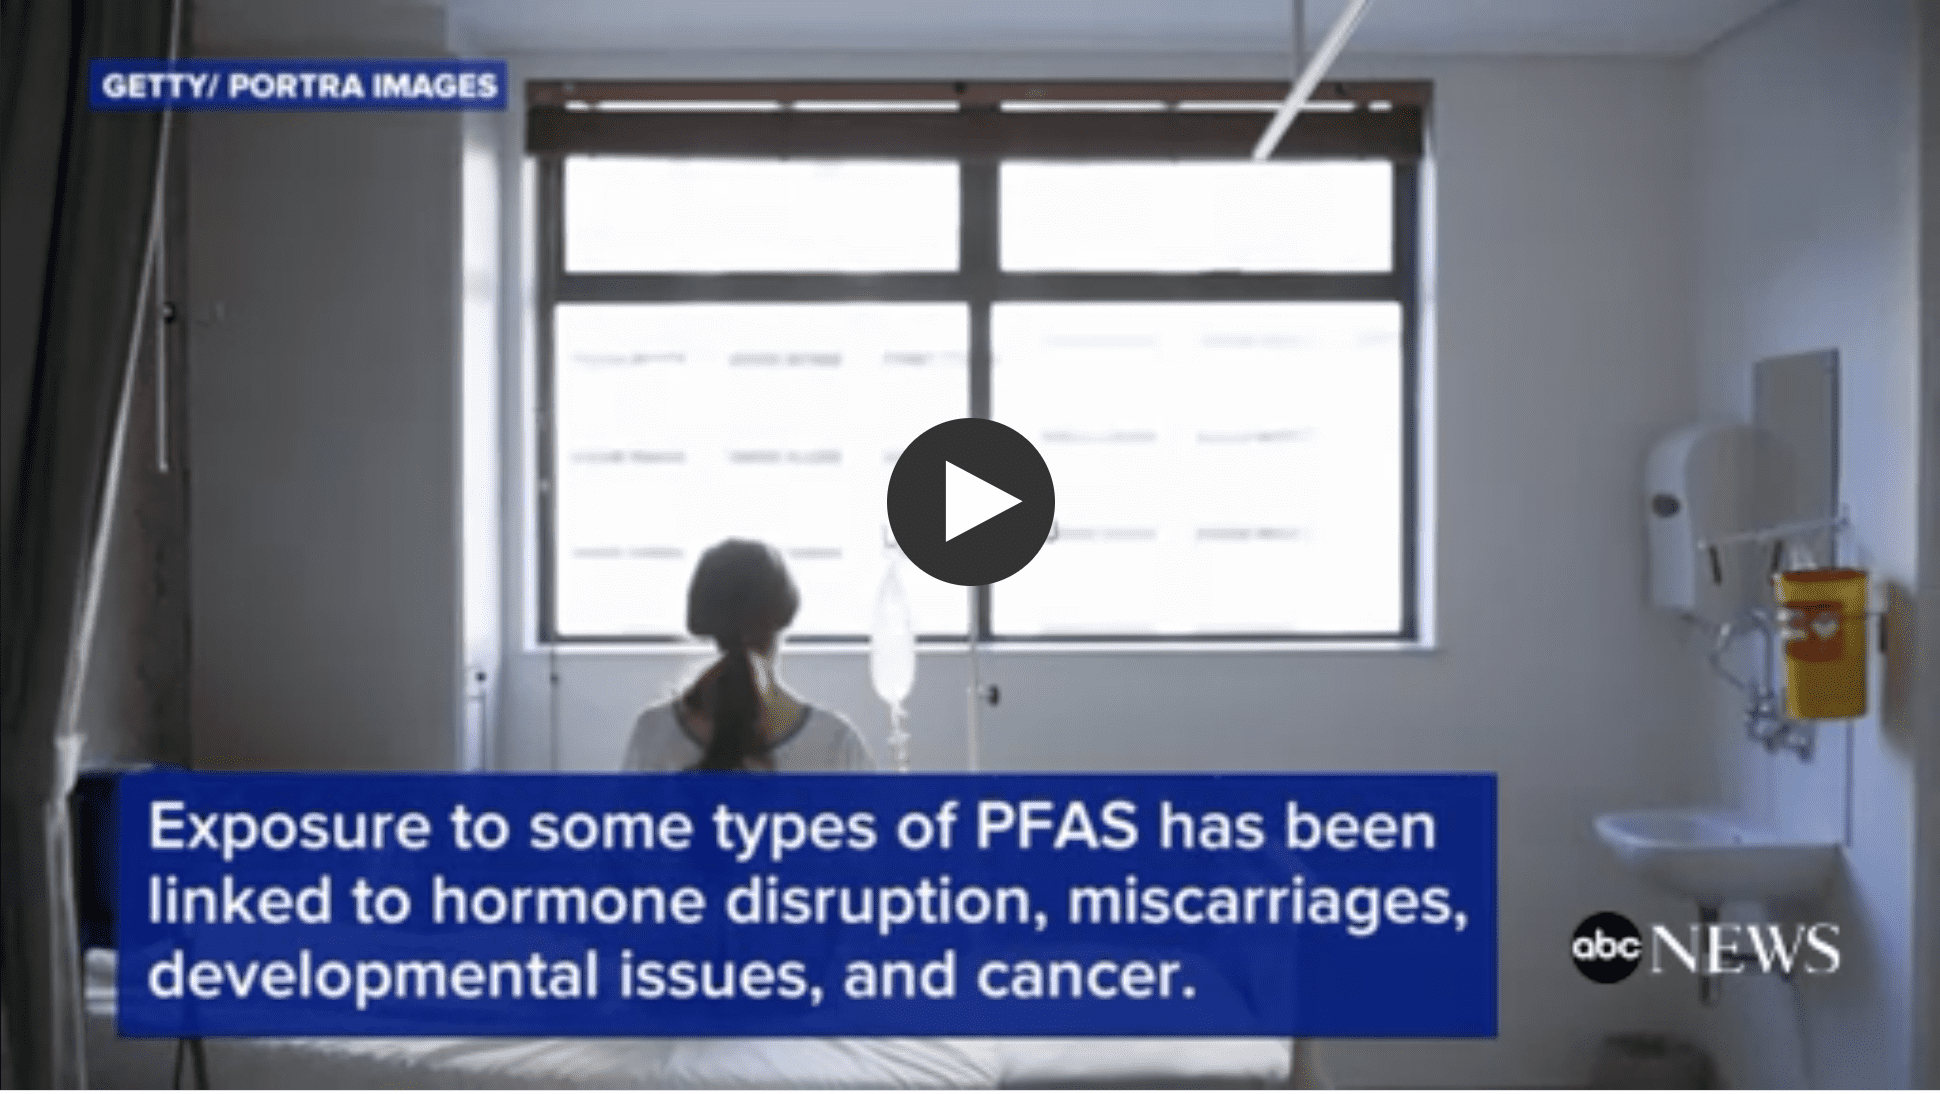 video screenshot: Exposure to some types of PFAS linked to hormone disruption, miscarriages, developmental issues, and cancer.